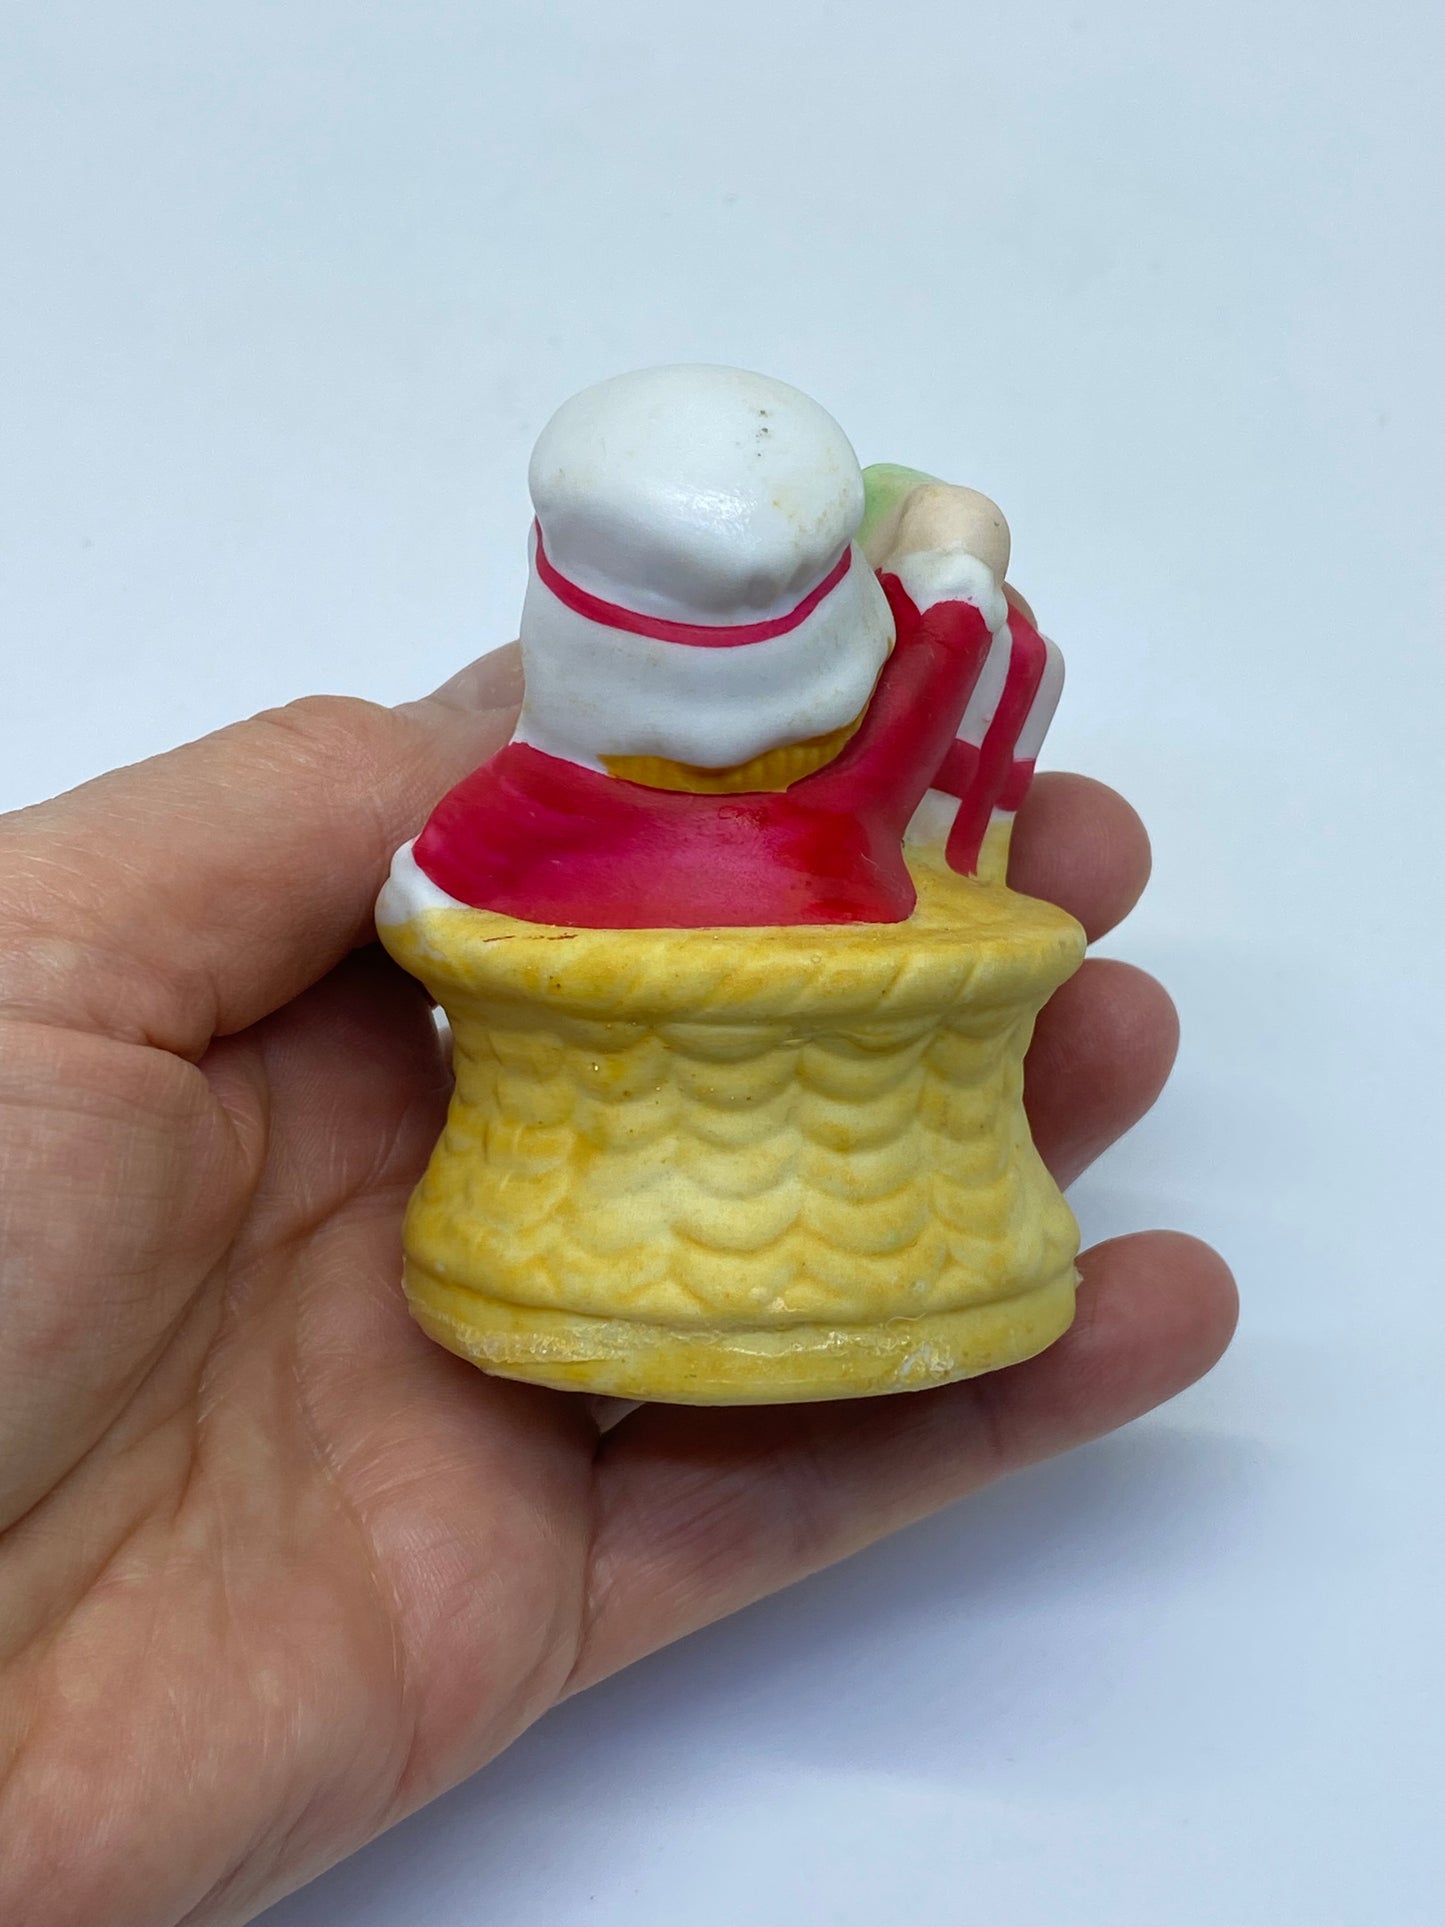 1970s/80s Christmas ornament ceramic/bisque bell - Toys in basket - Jasco Taiwan